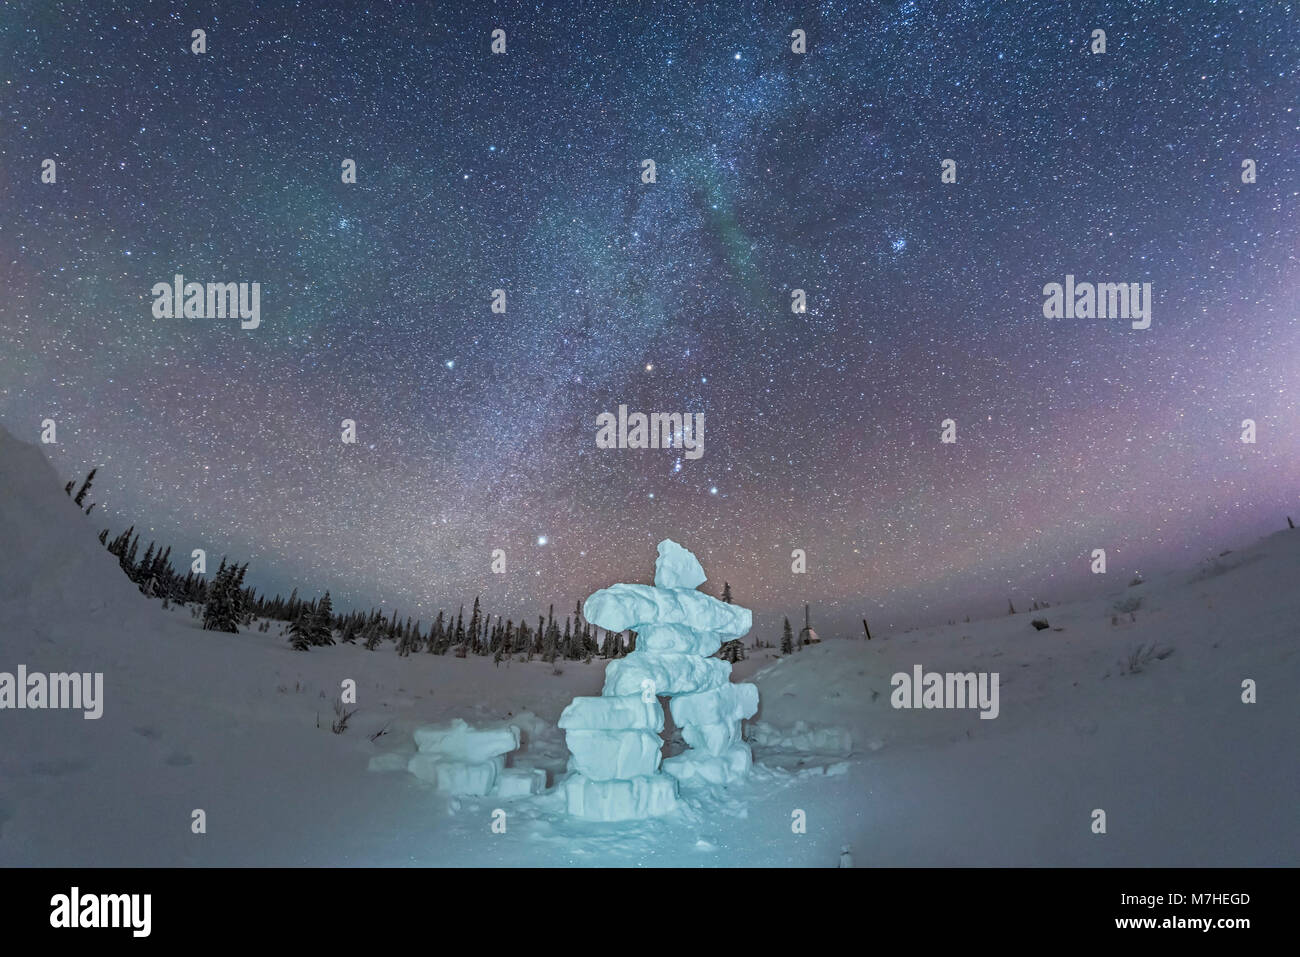 Milky Way and winter stars over a mock-up inukshuk figure made of snow, Canada. Stock Photo